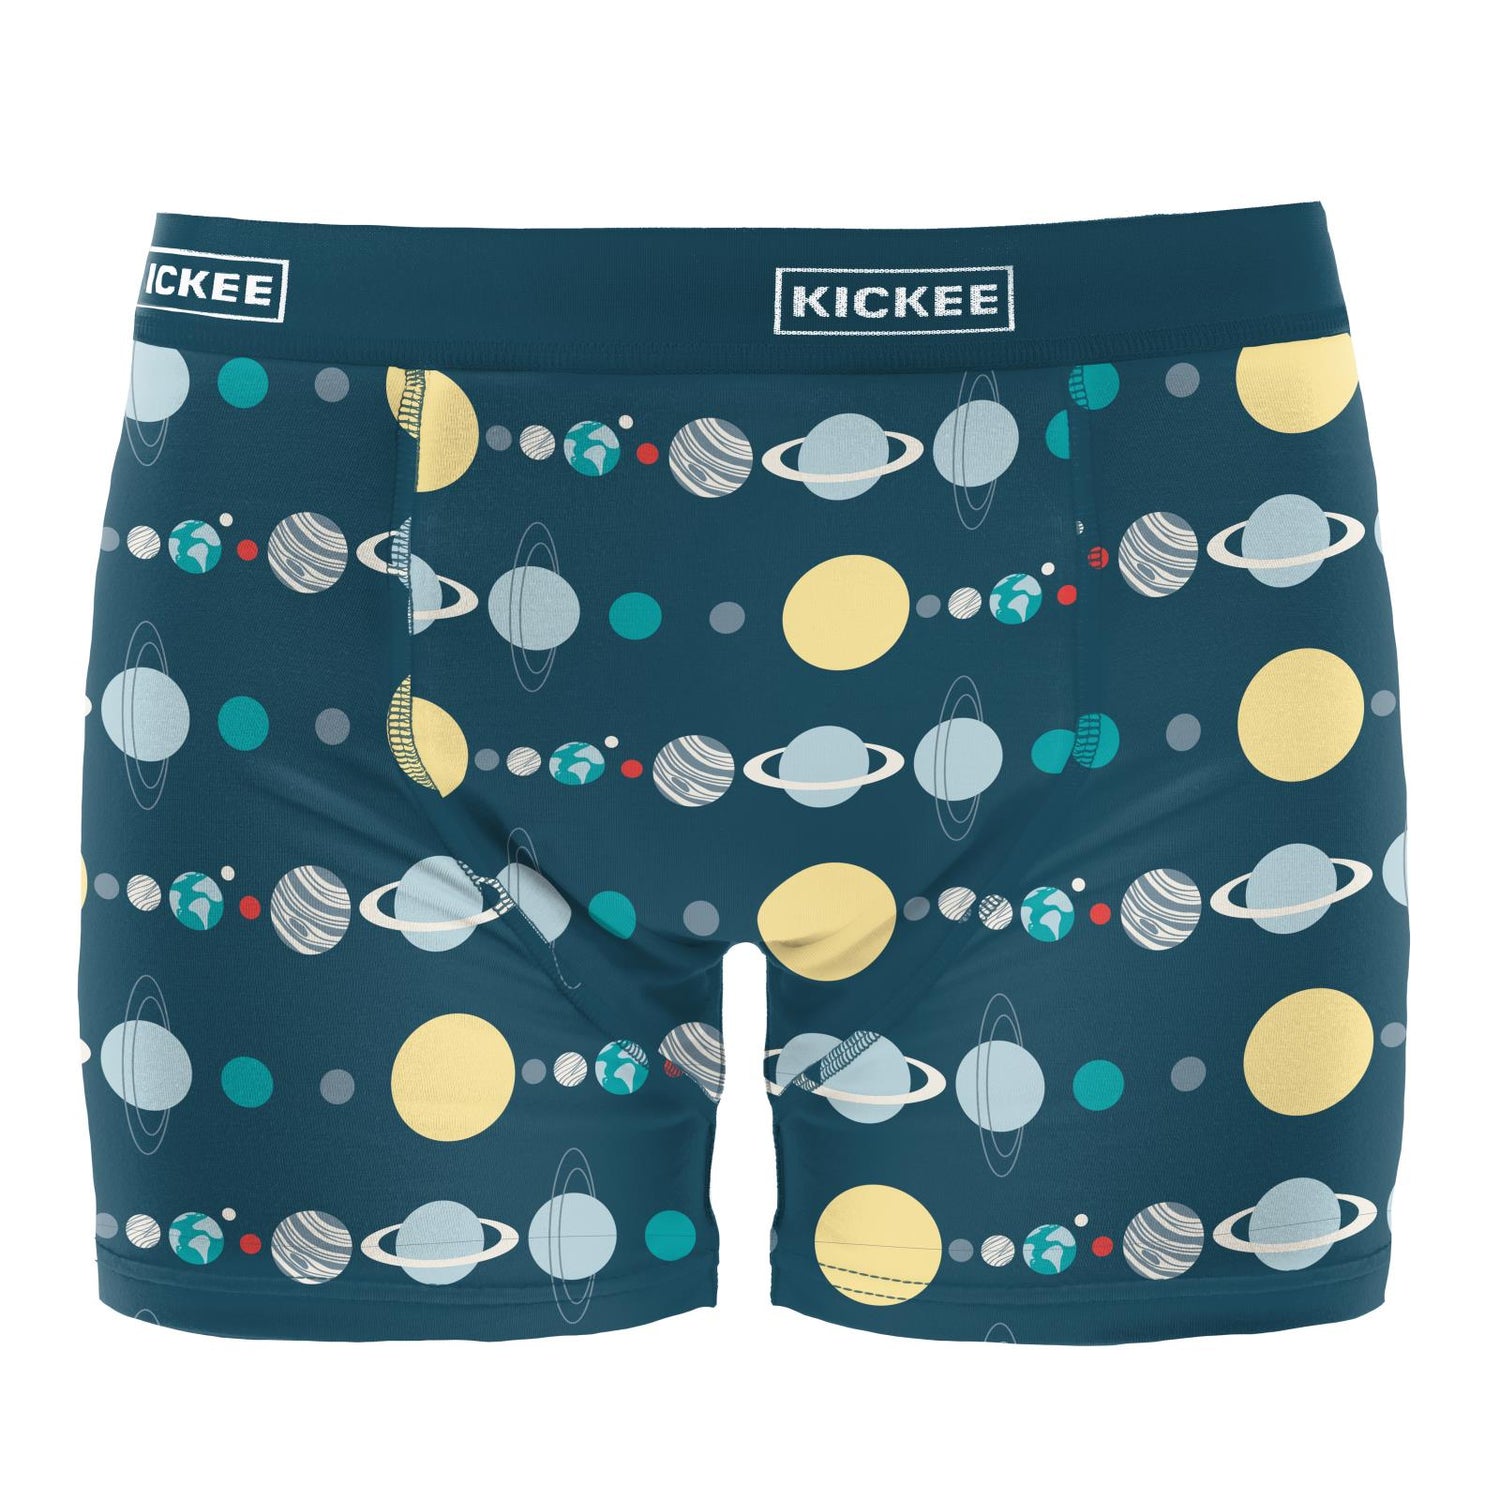 Men's Print Boxer Brief in Peacock Planets